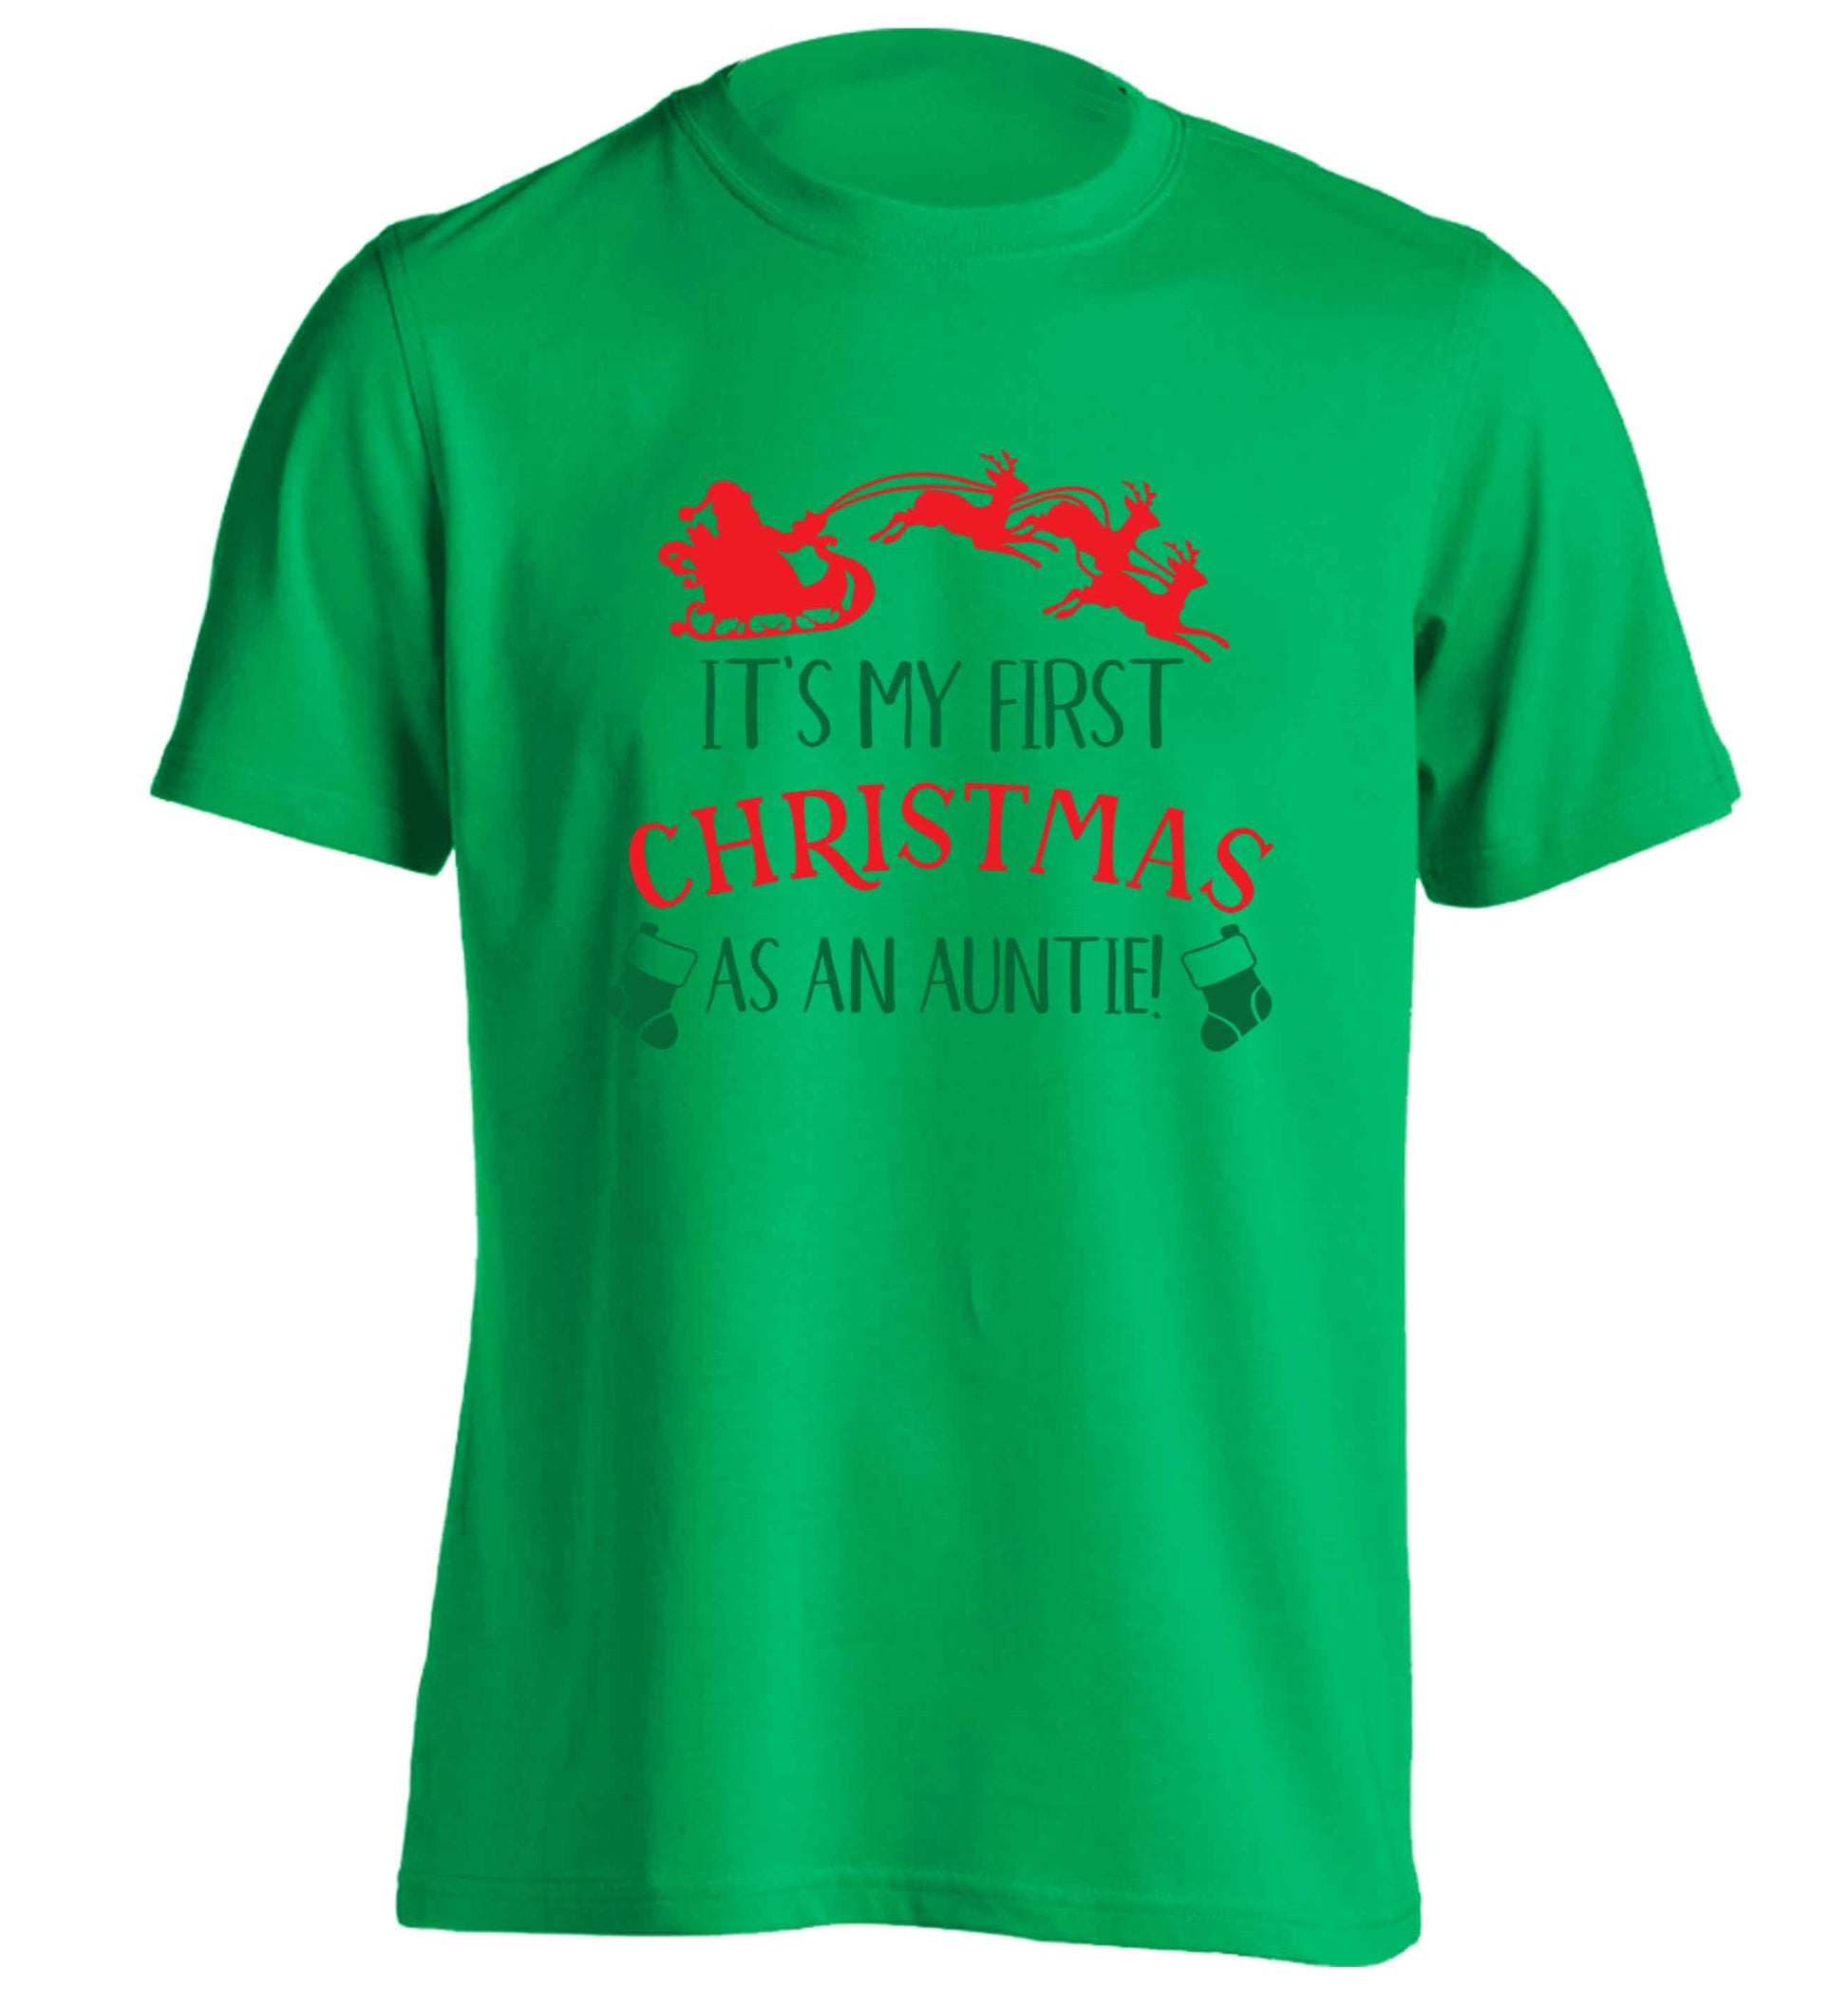 It's my first Christmas as an auntie! adults unisex green Tshirt 2XL